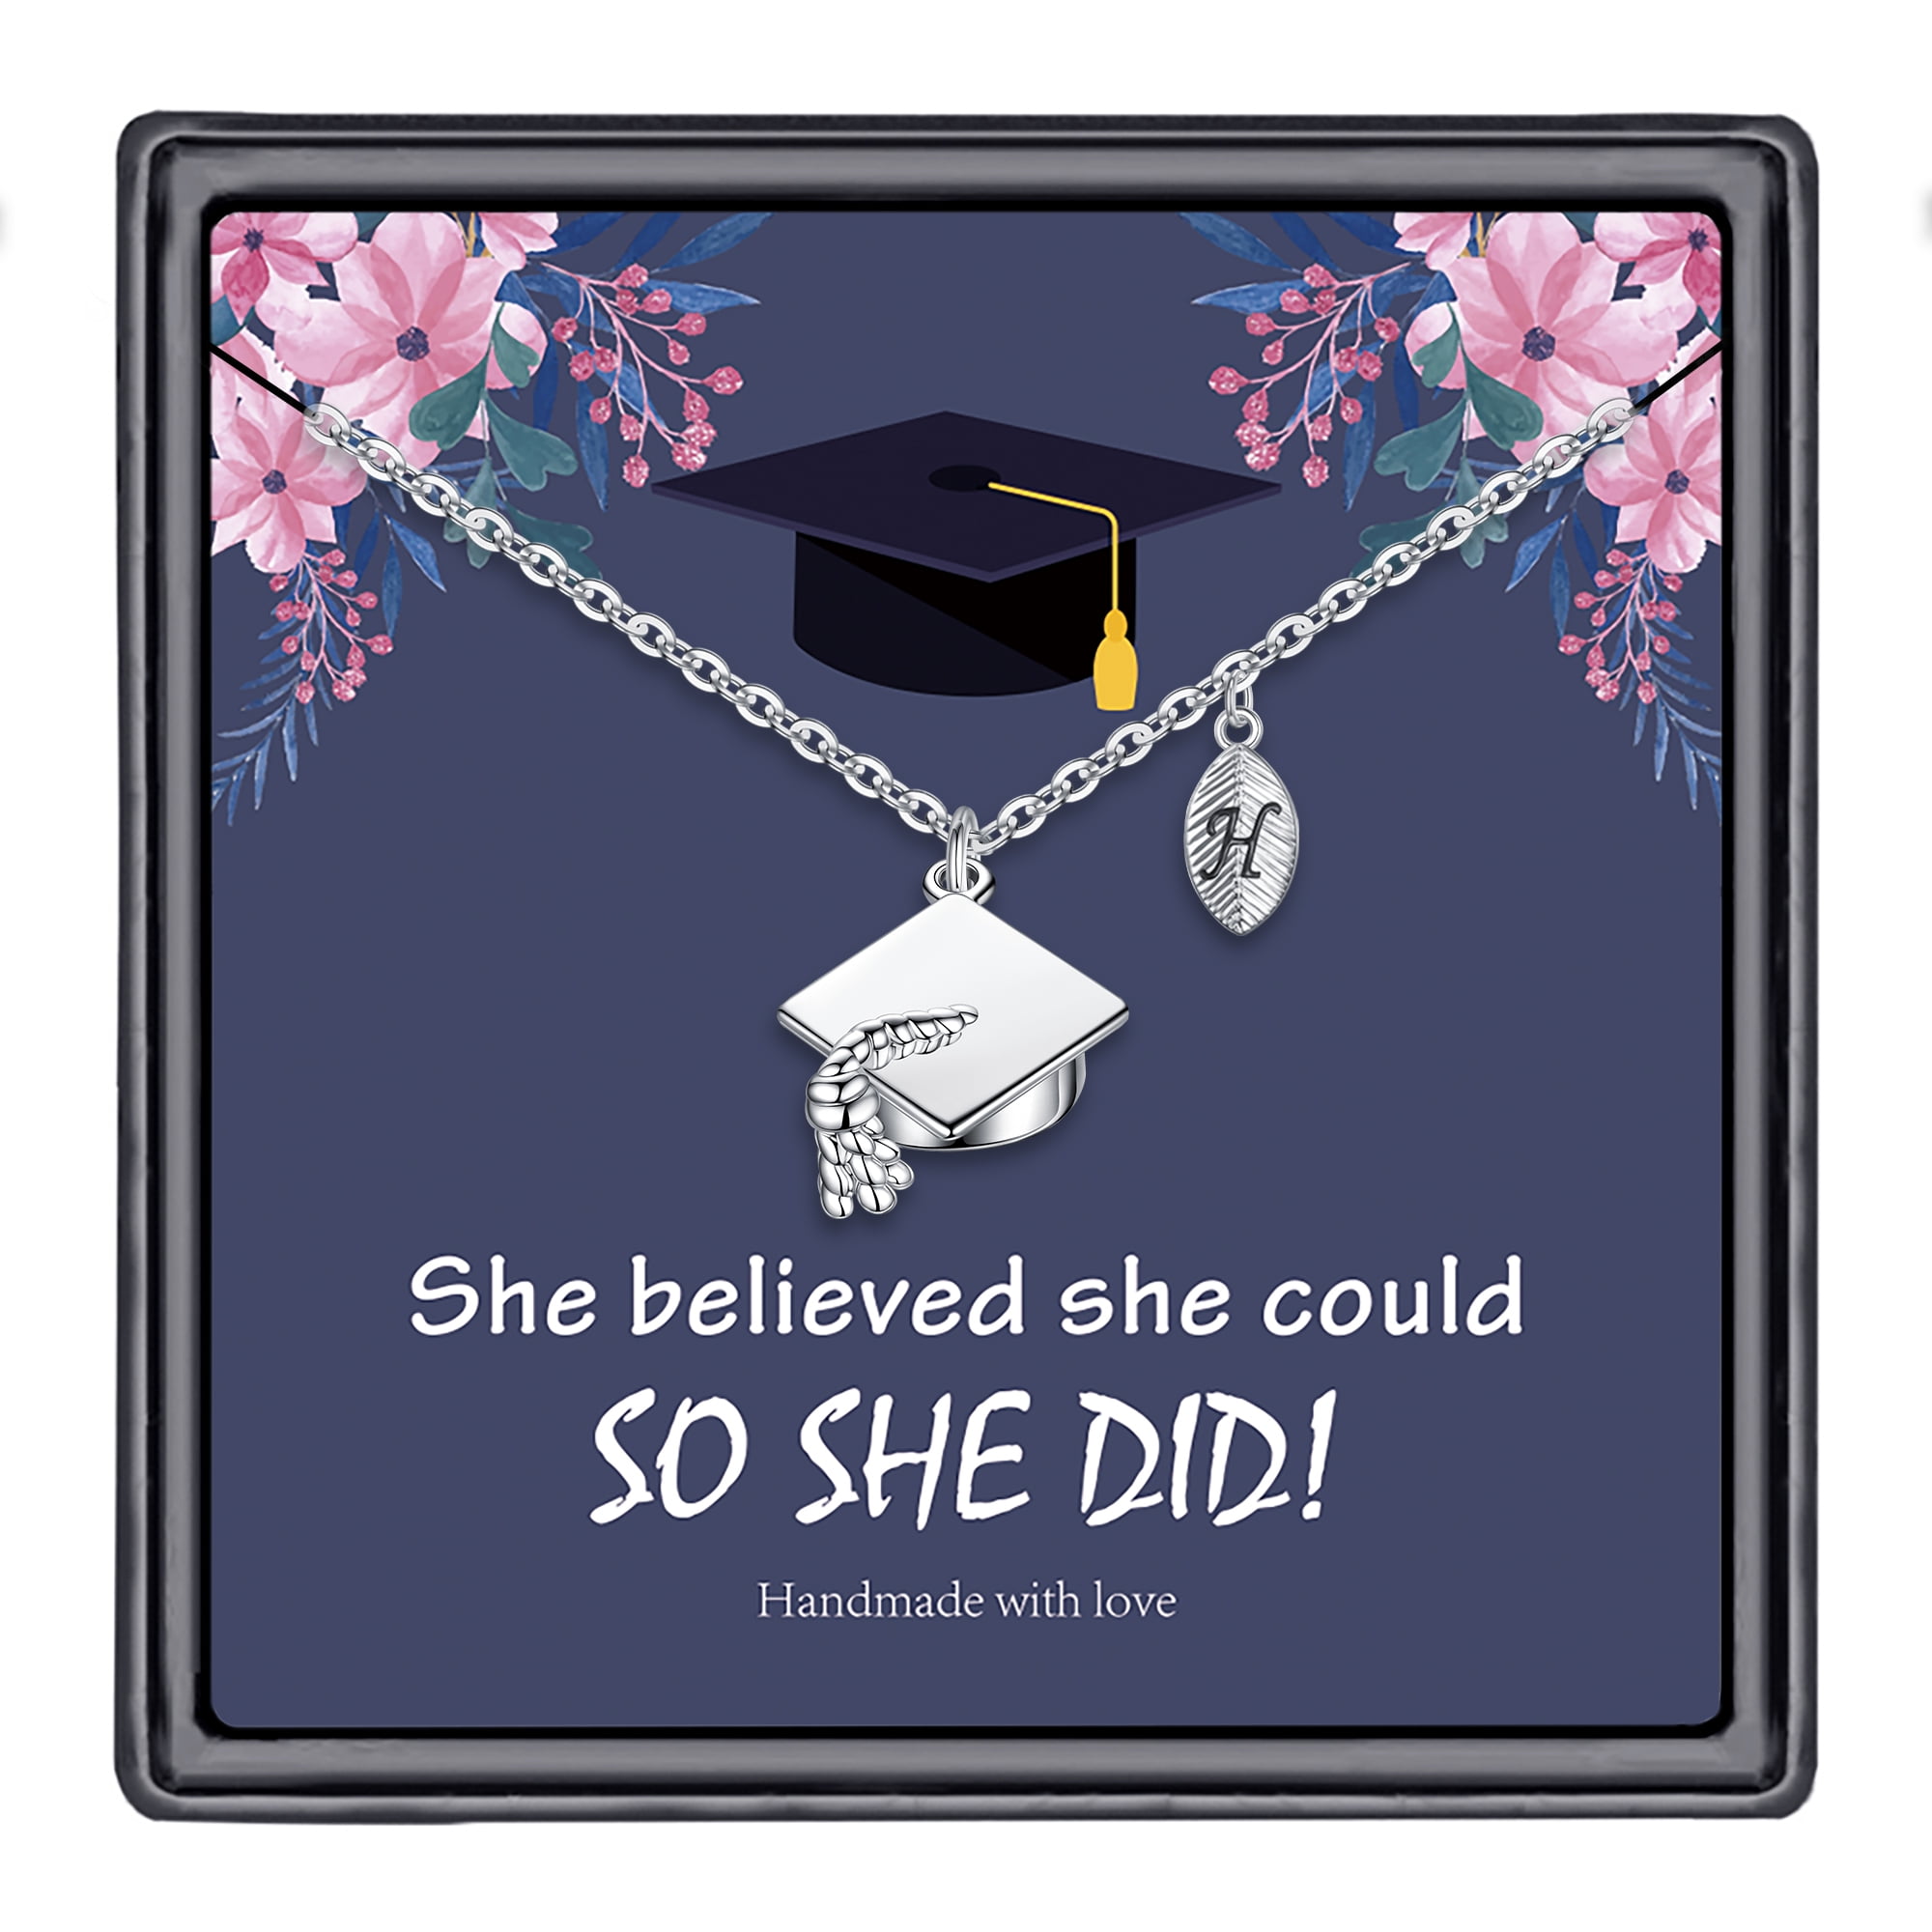 IEFSHINY Graduation Gifts for Her White Gold Plated Cap Pendant Necklace Graduation Gifts for Women Teen Girls